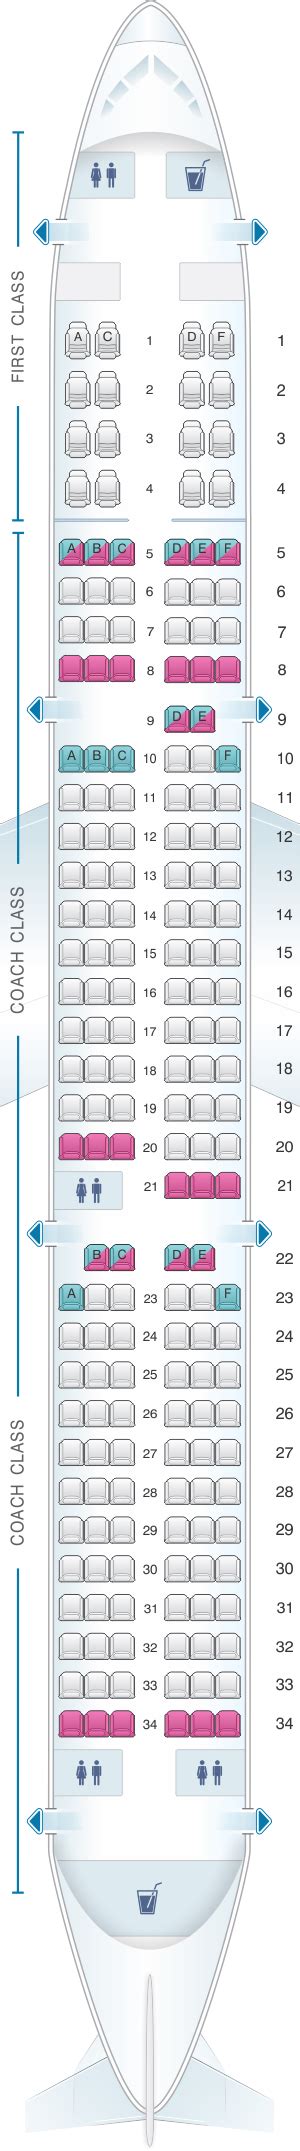 Aa Airbus A Neo Seat Map Image To U